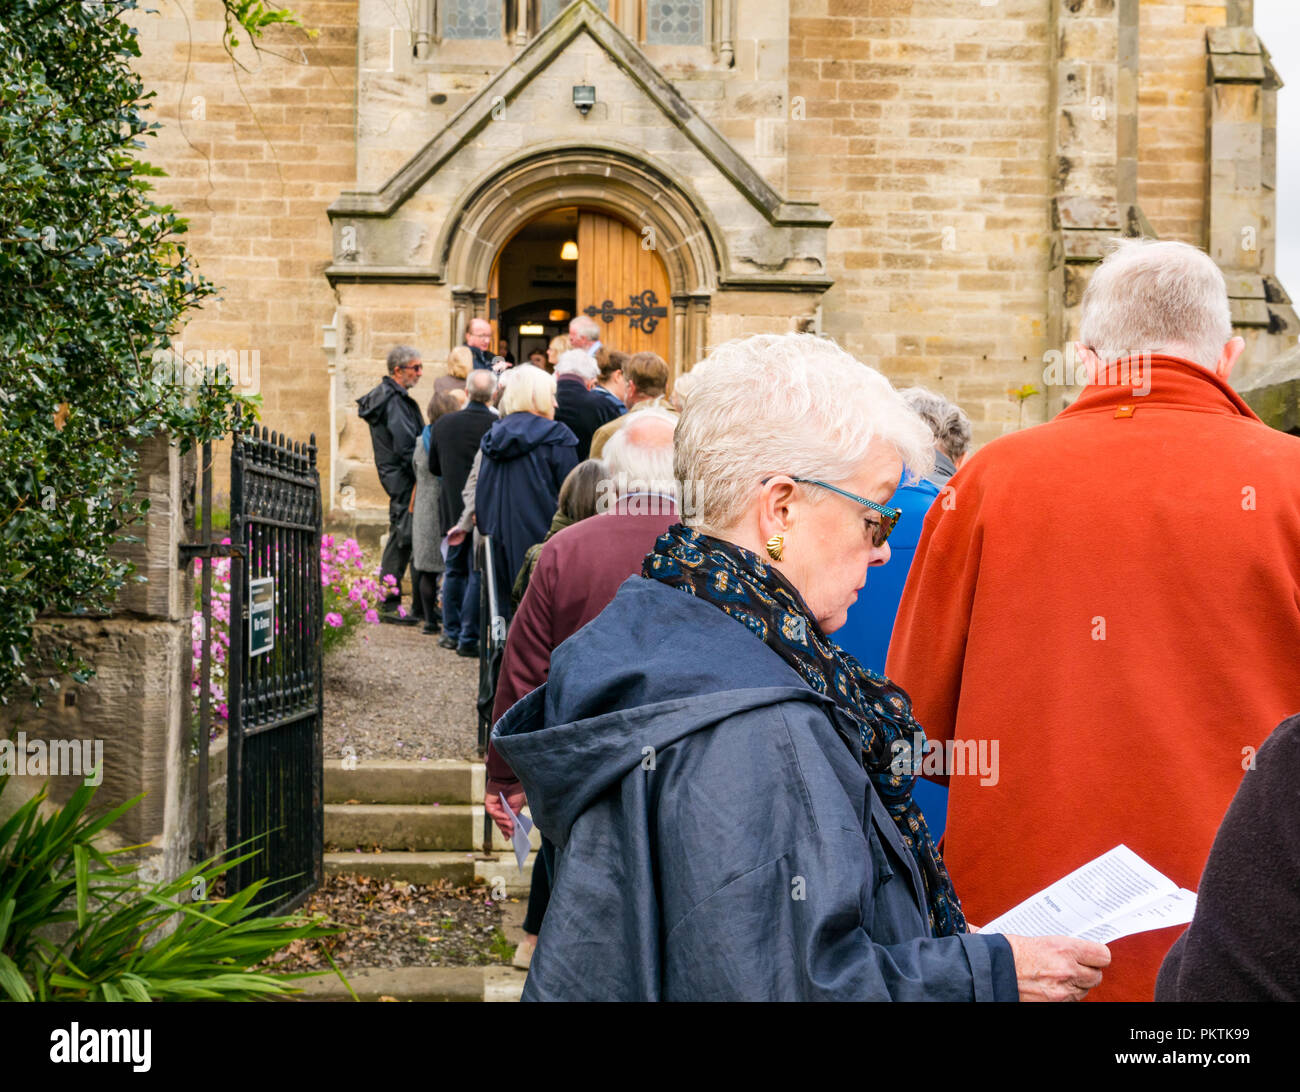 Gladsmuir Parish Church, Gladsmuir, East Lothian, Scotland, UK, 15th September 2018. A concert at the Lammermuir Festival in Gladsmuir. People queue to get into the concert and buy programmes Stock Photo